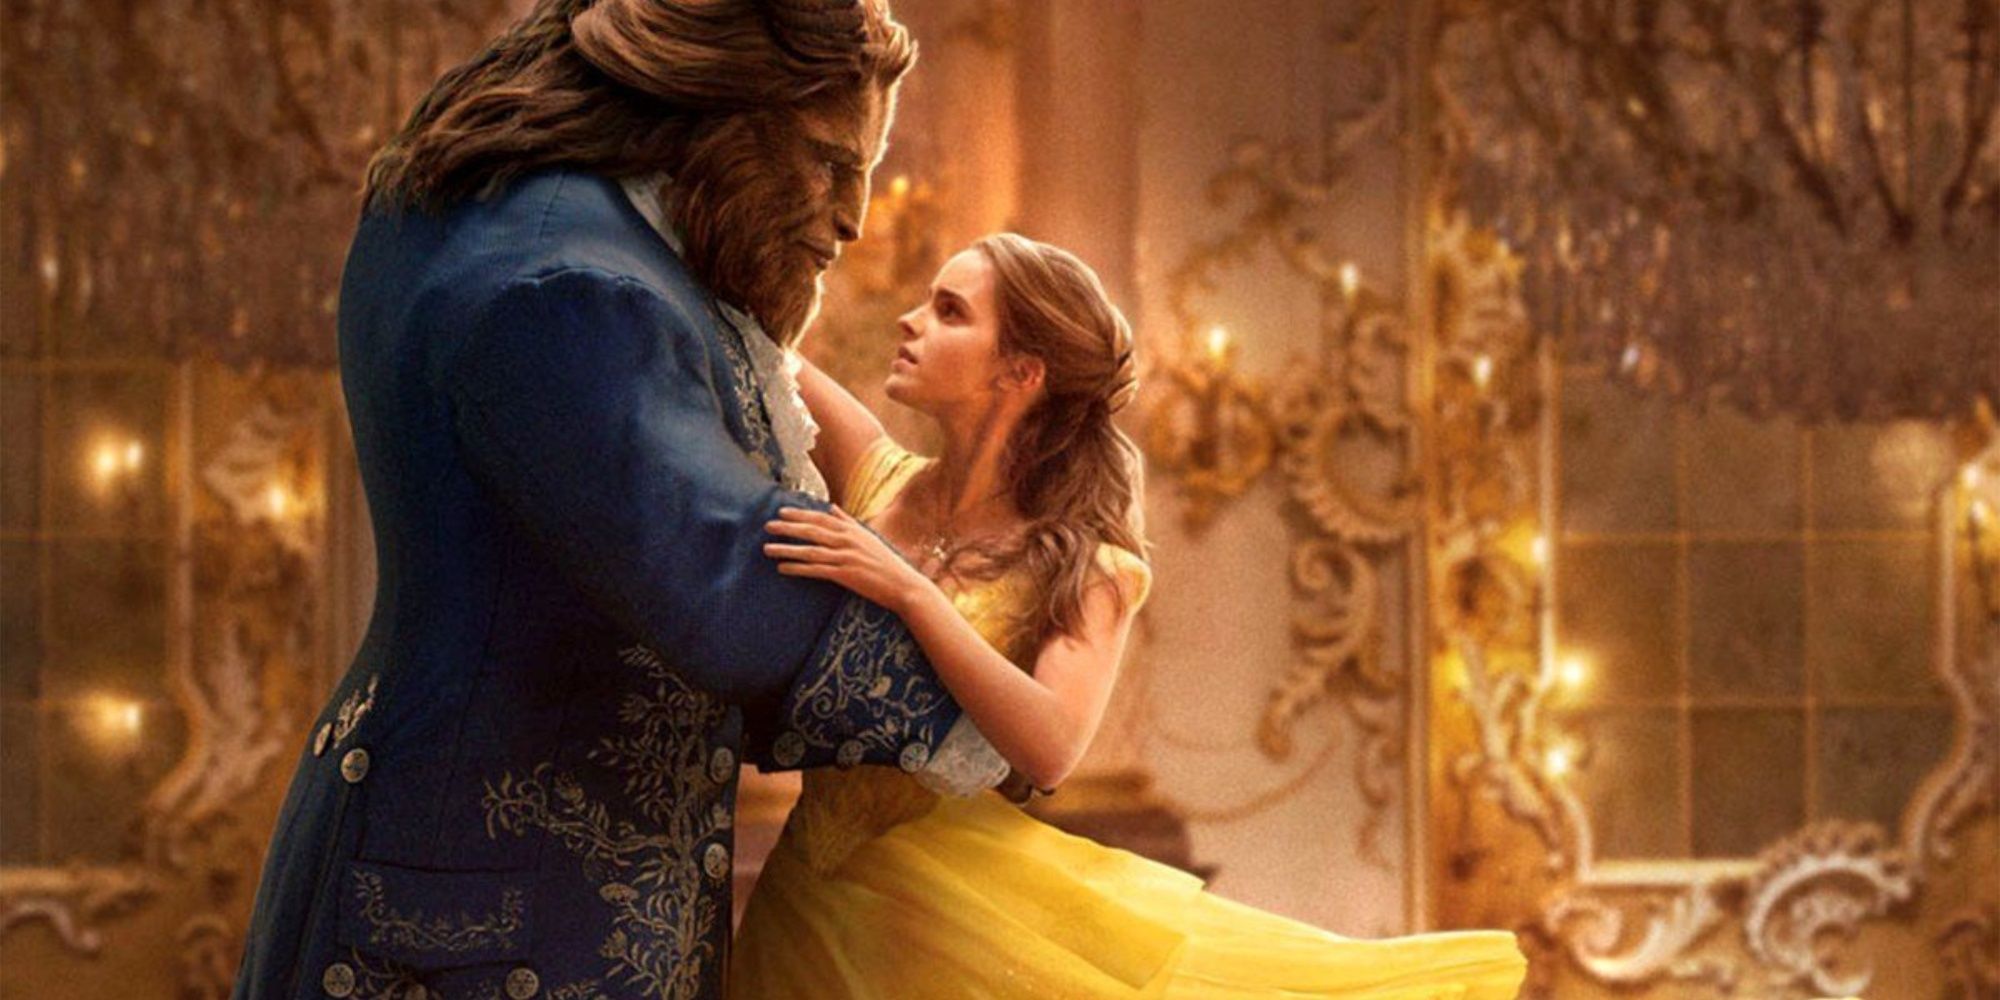 Belle (played by Emma Watson) with the Beast dancing in her iconic yellow dress.